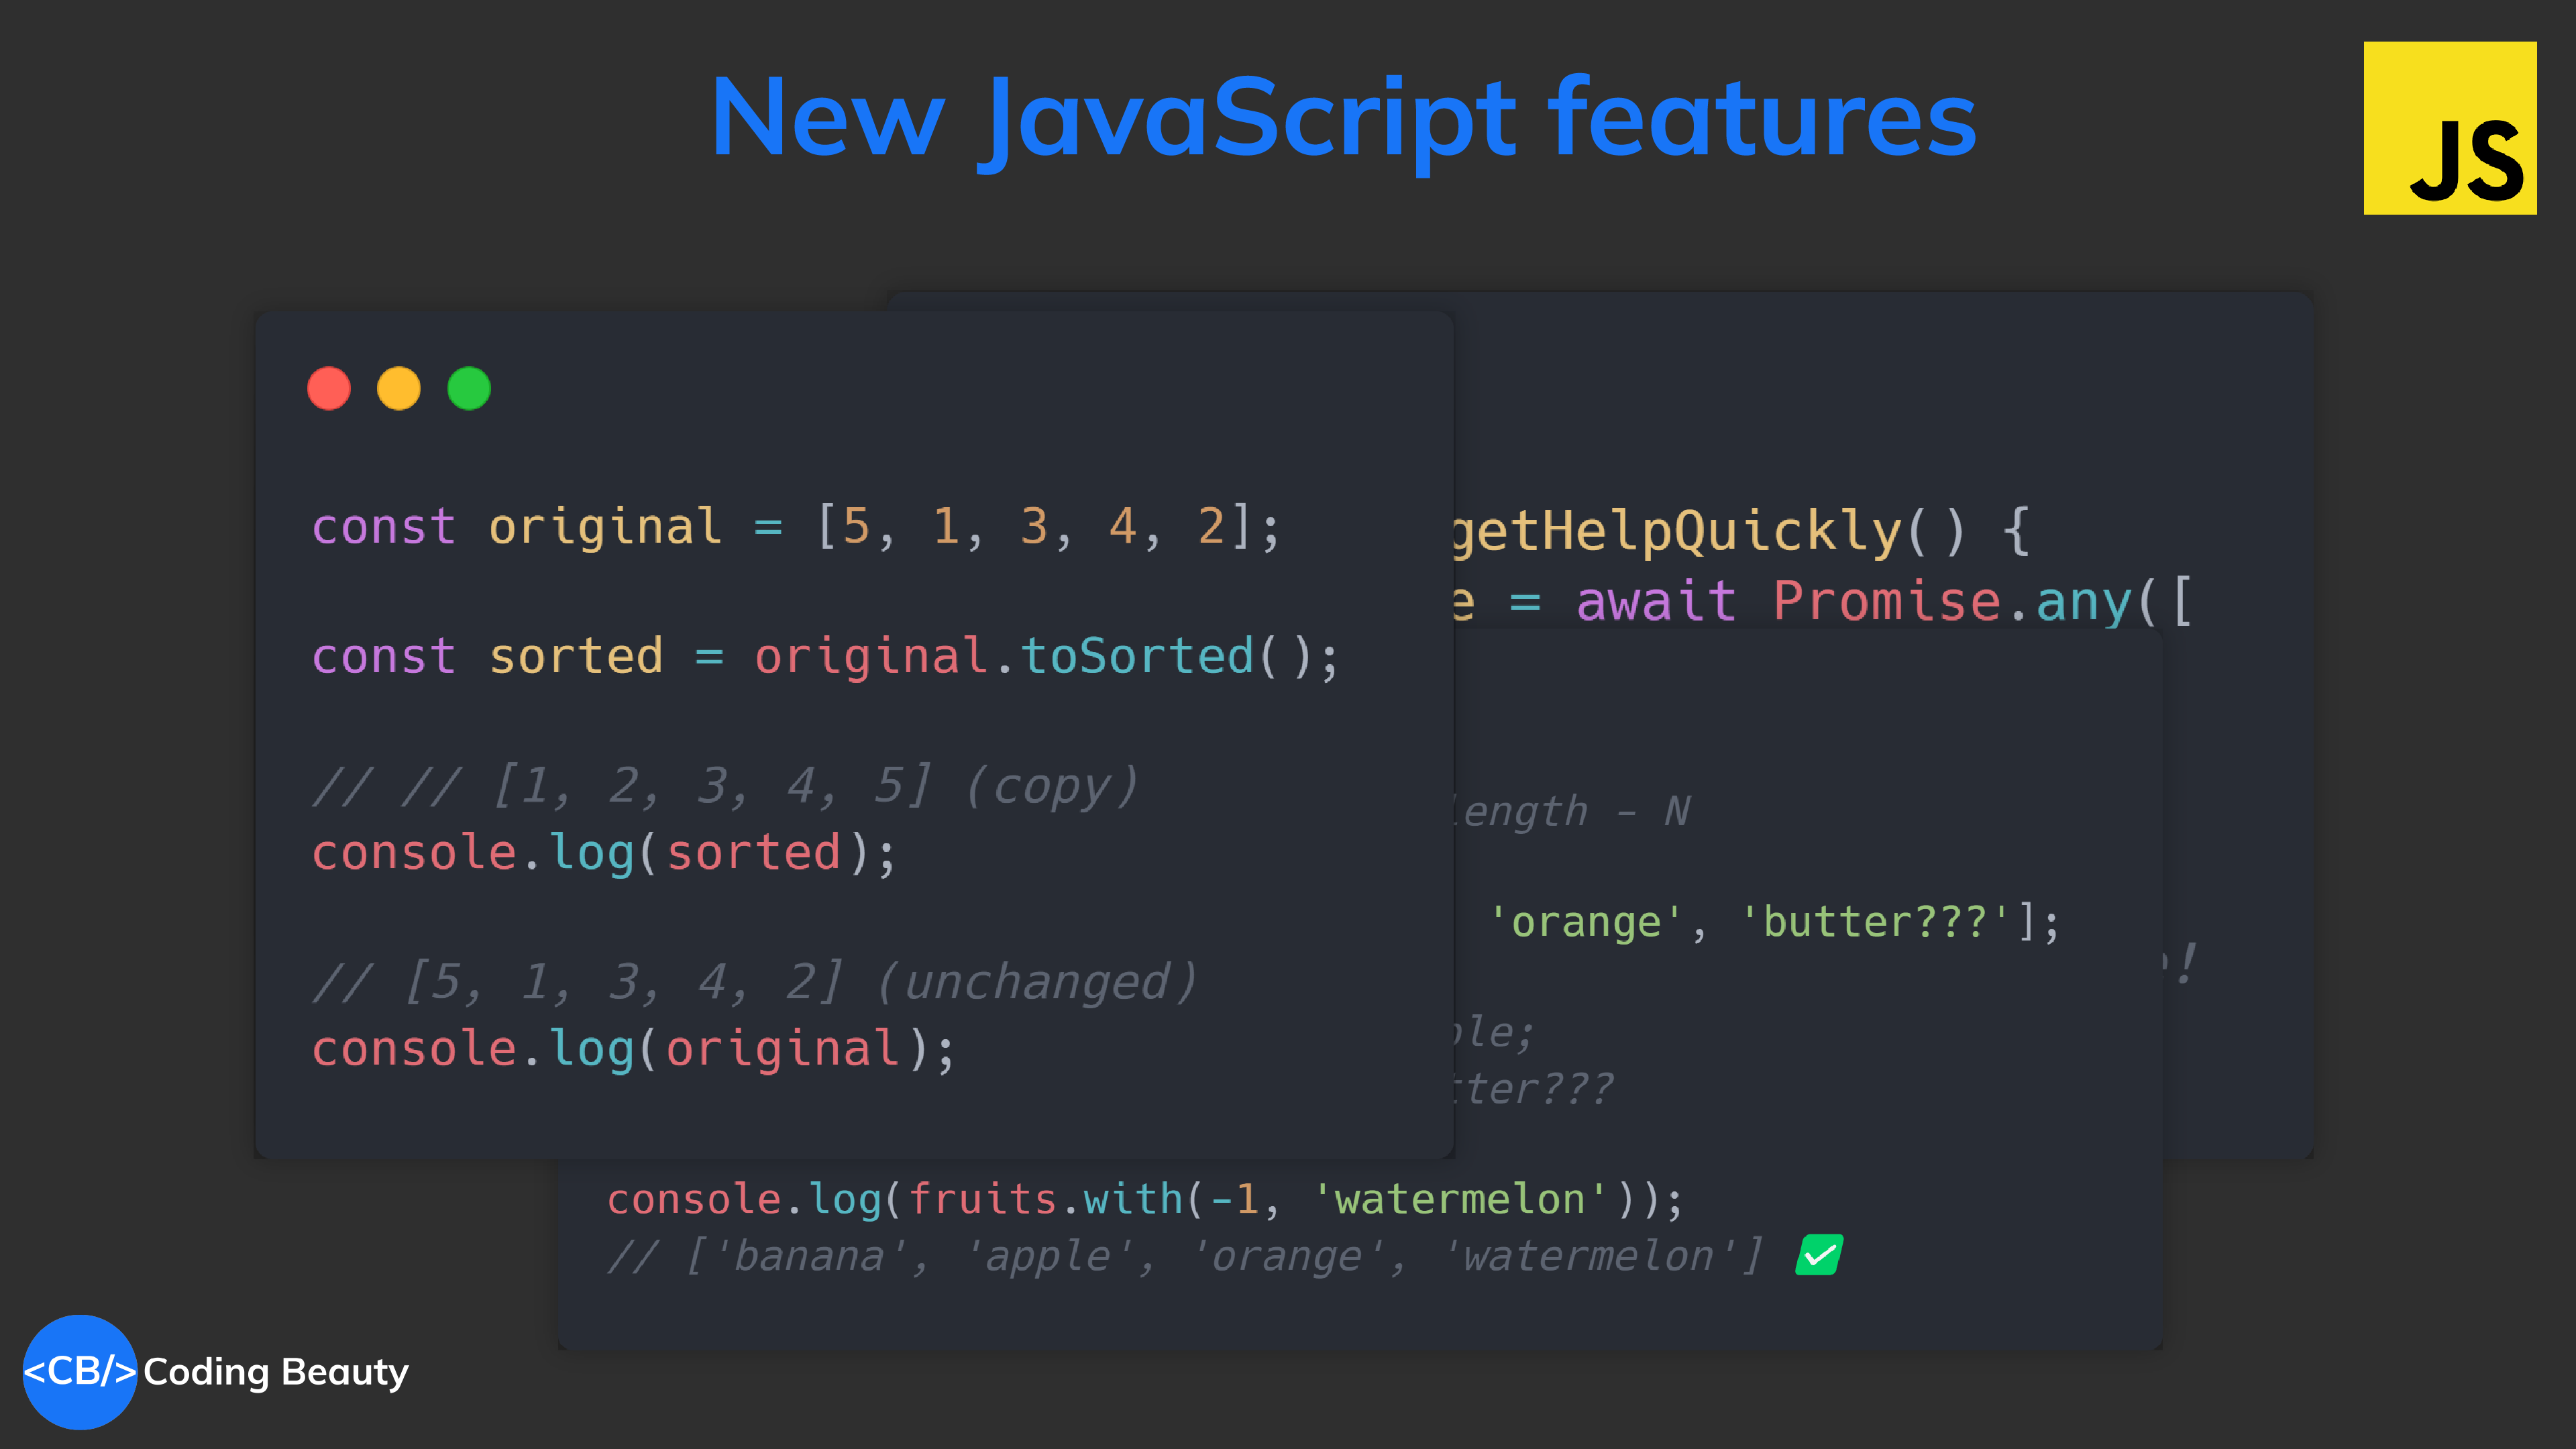 Top 10 new JavaScript features from 2021 to 2023